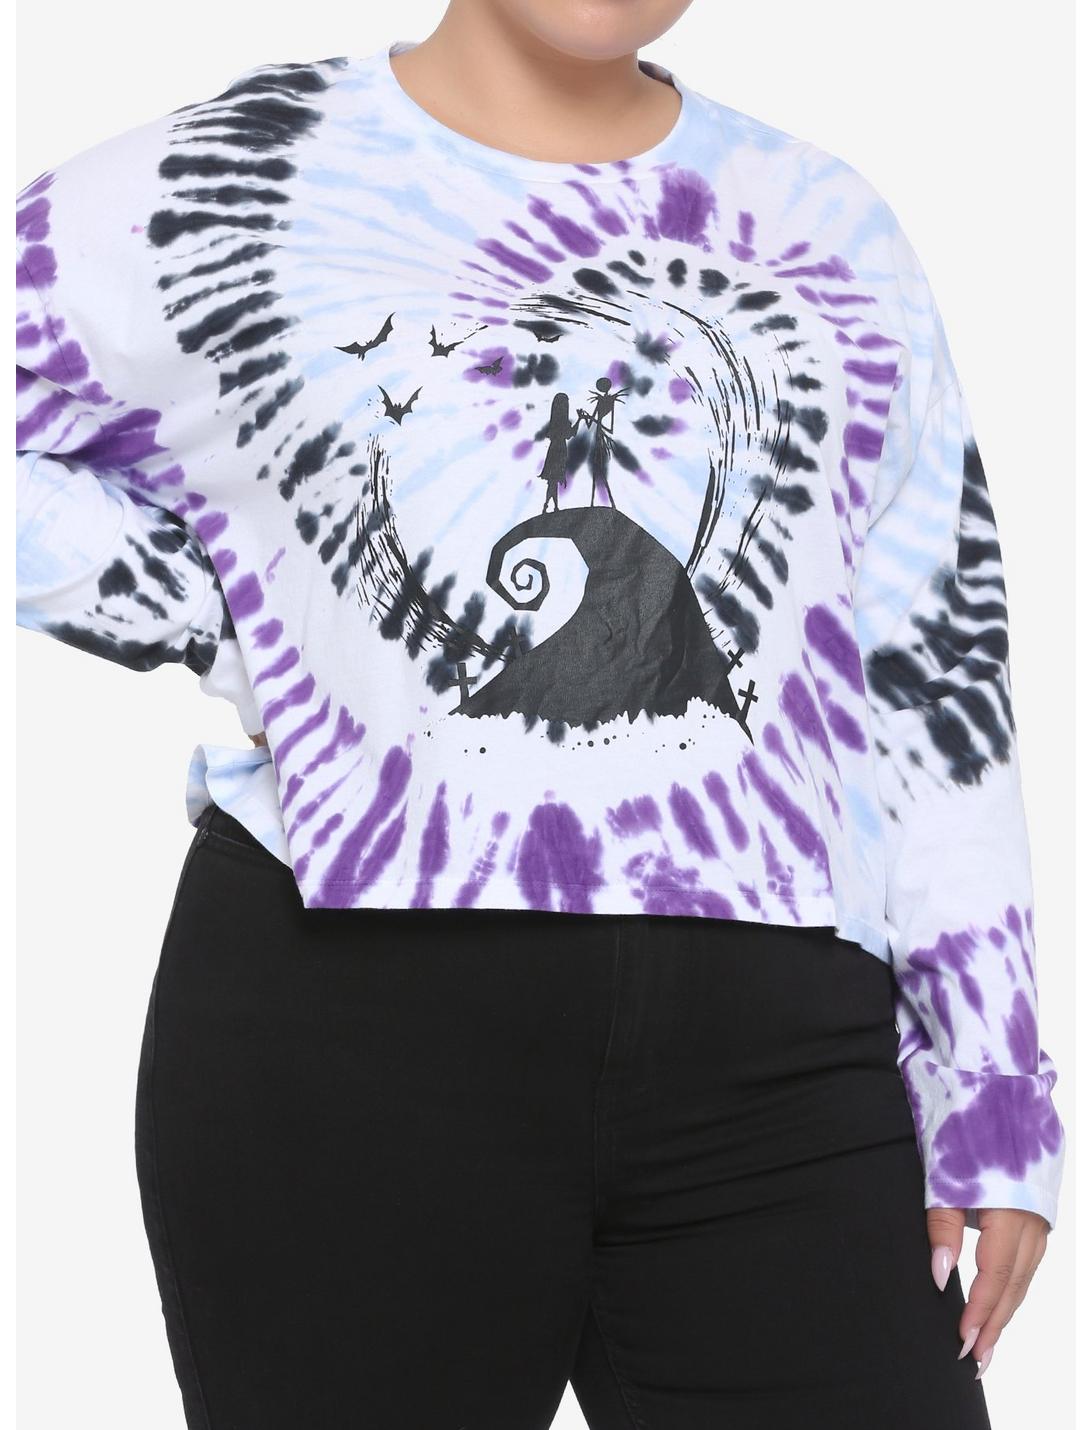 The Nightmare Before Christmas Spiral Hill Tie-Dye Crop Long-Sleeve T-Shirt Plus Size, MULTI, hi-res